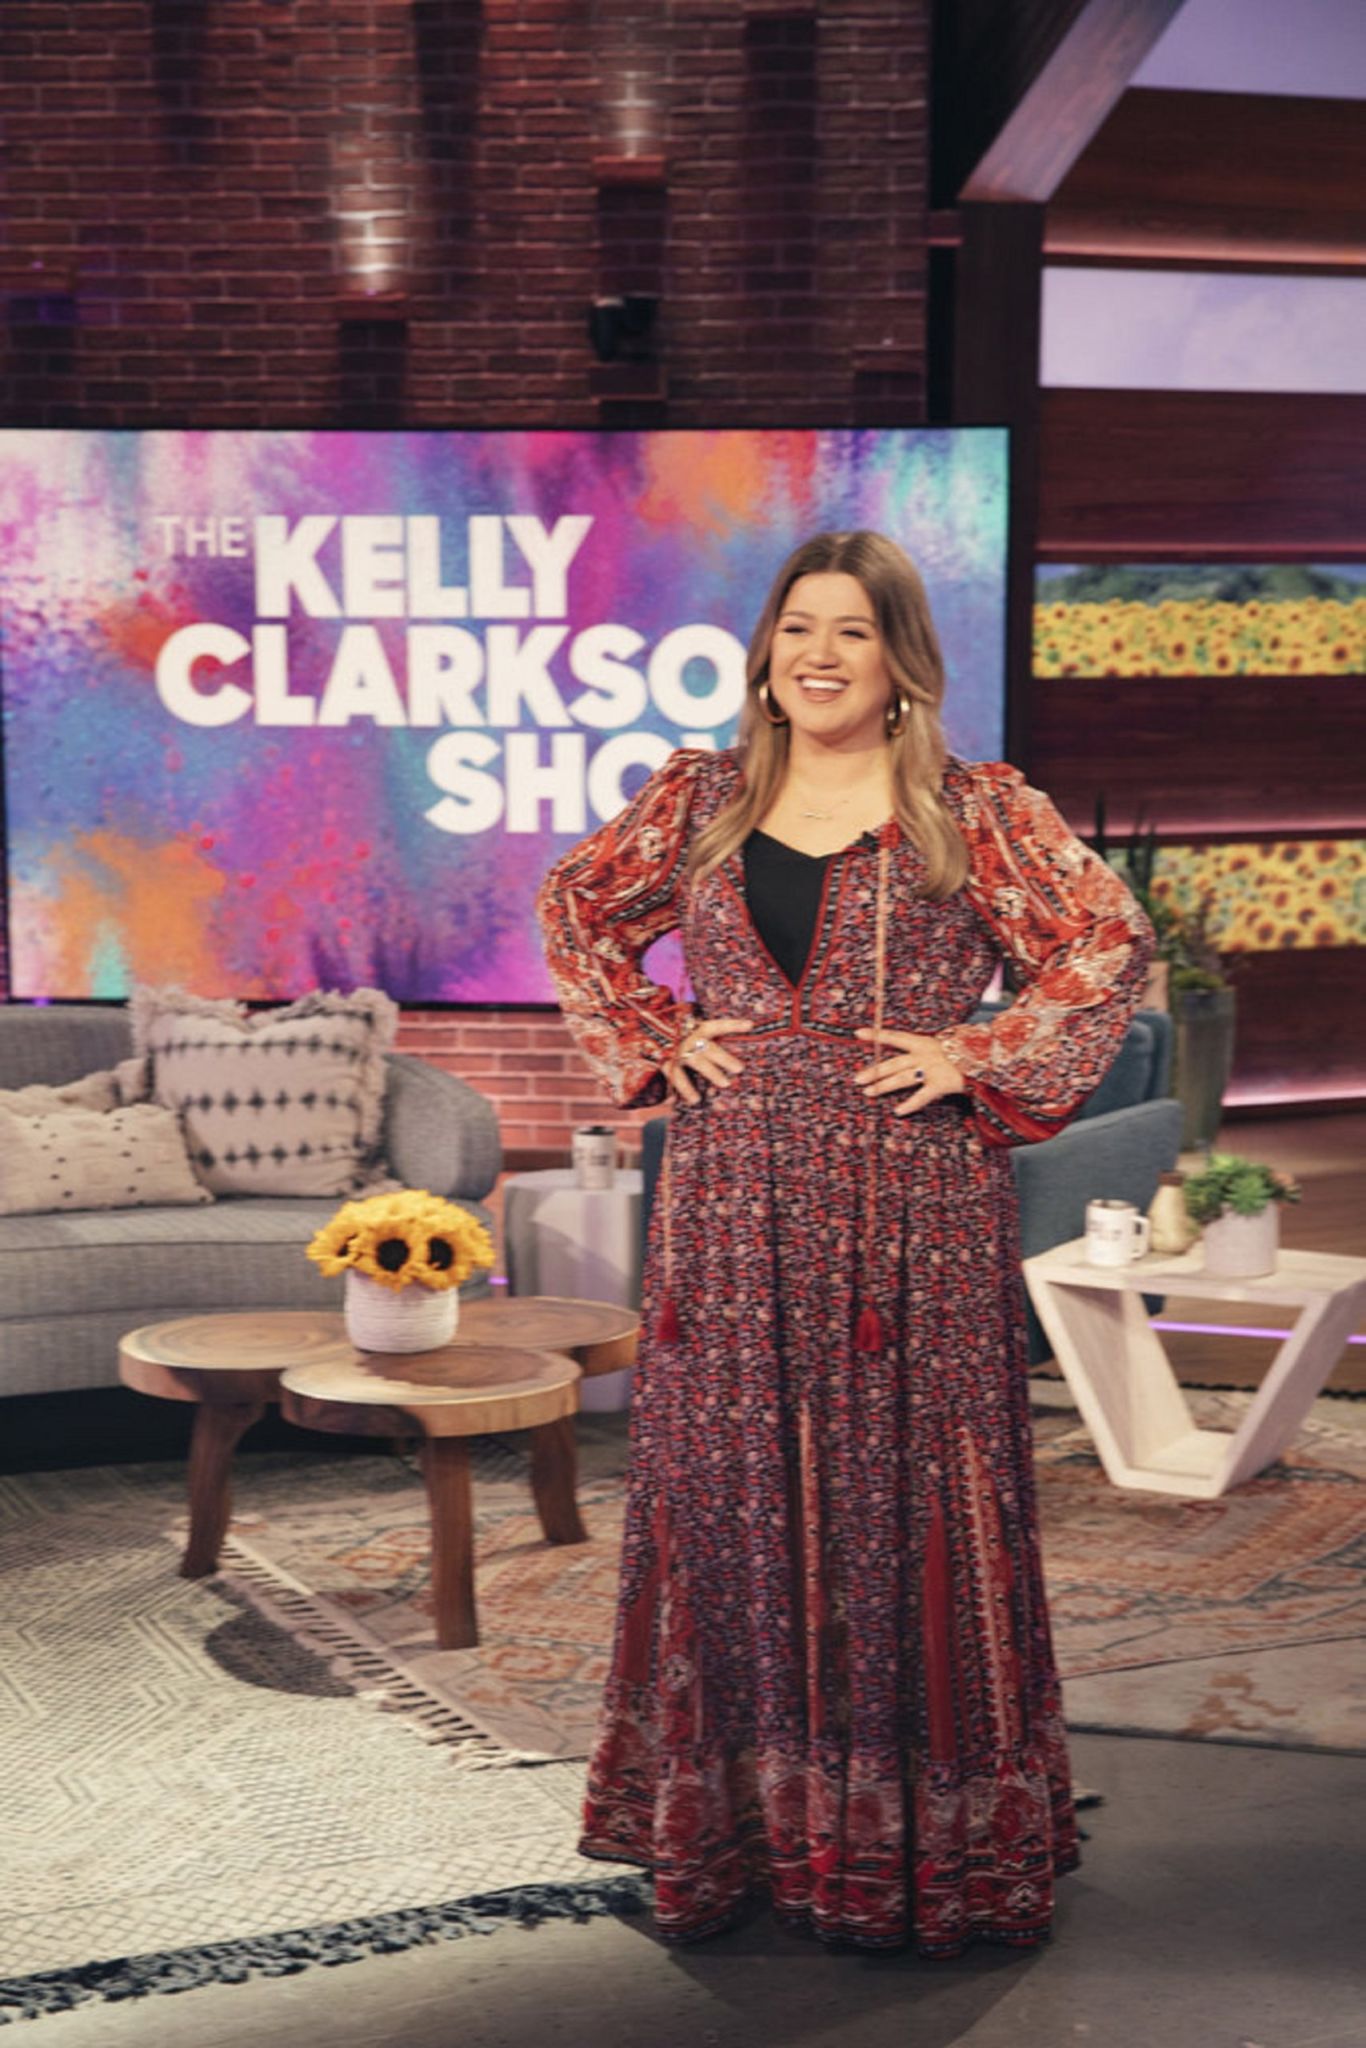 Kelly Clarkson Responds to Allegations of Workplace Toxicity